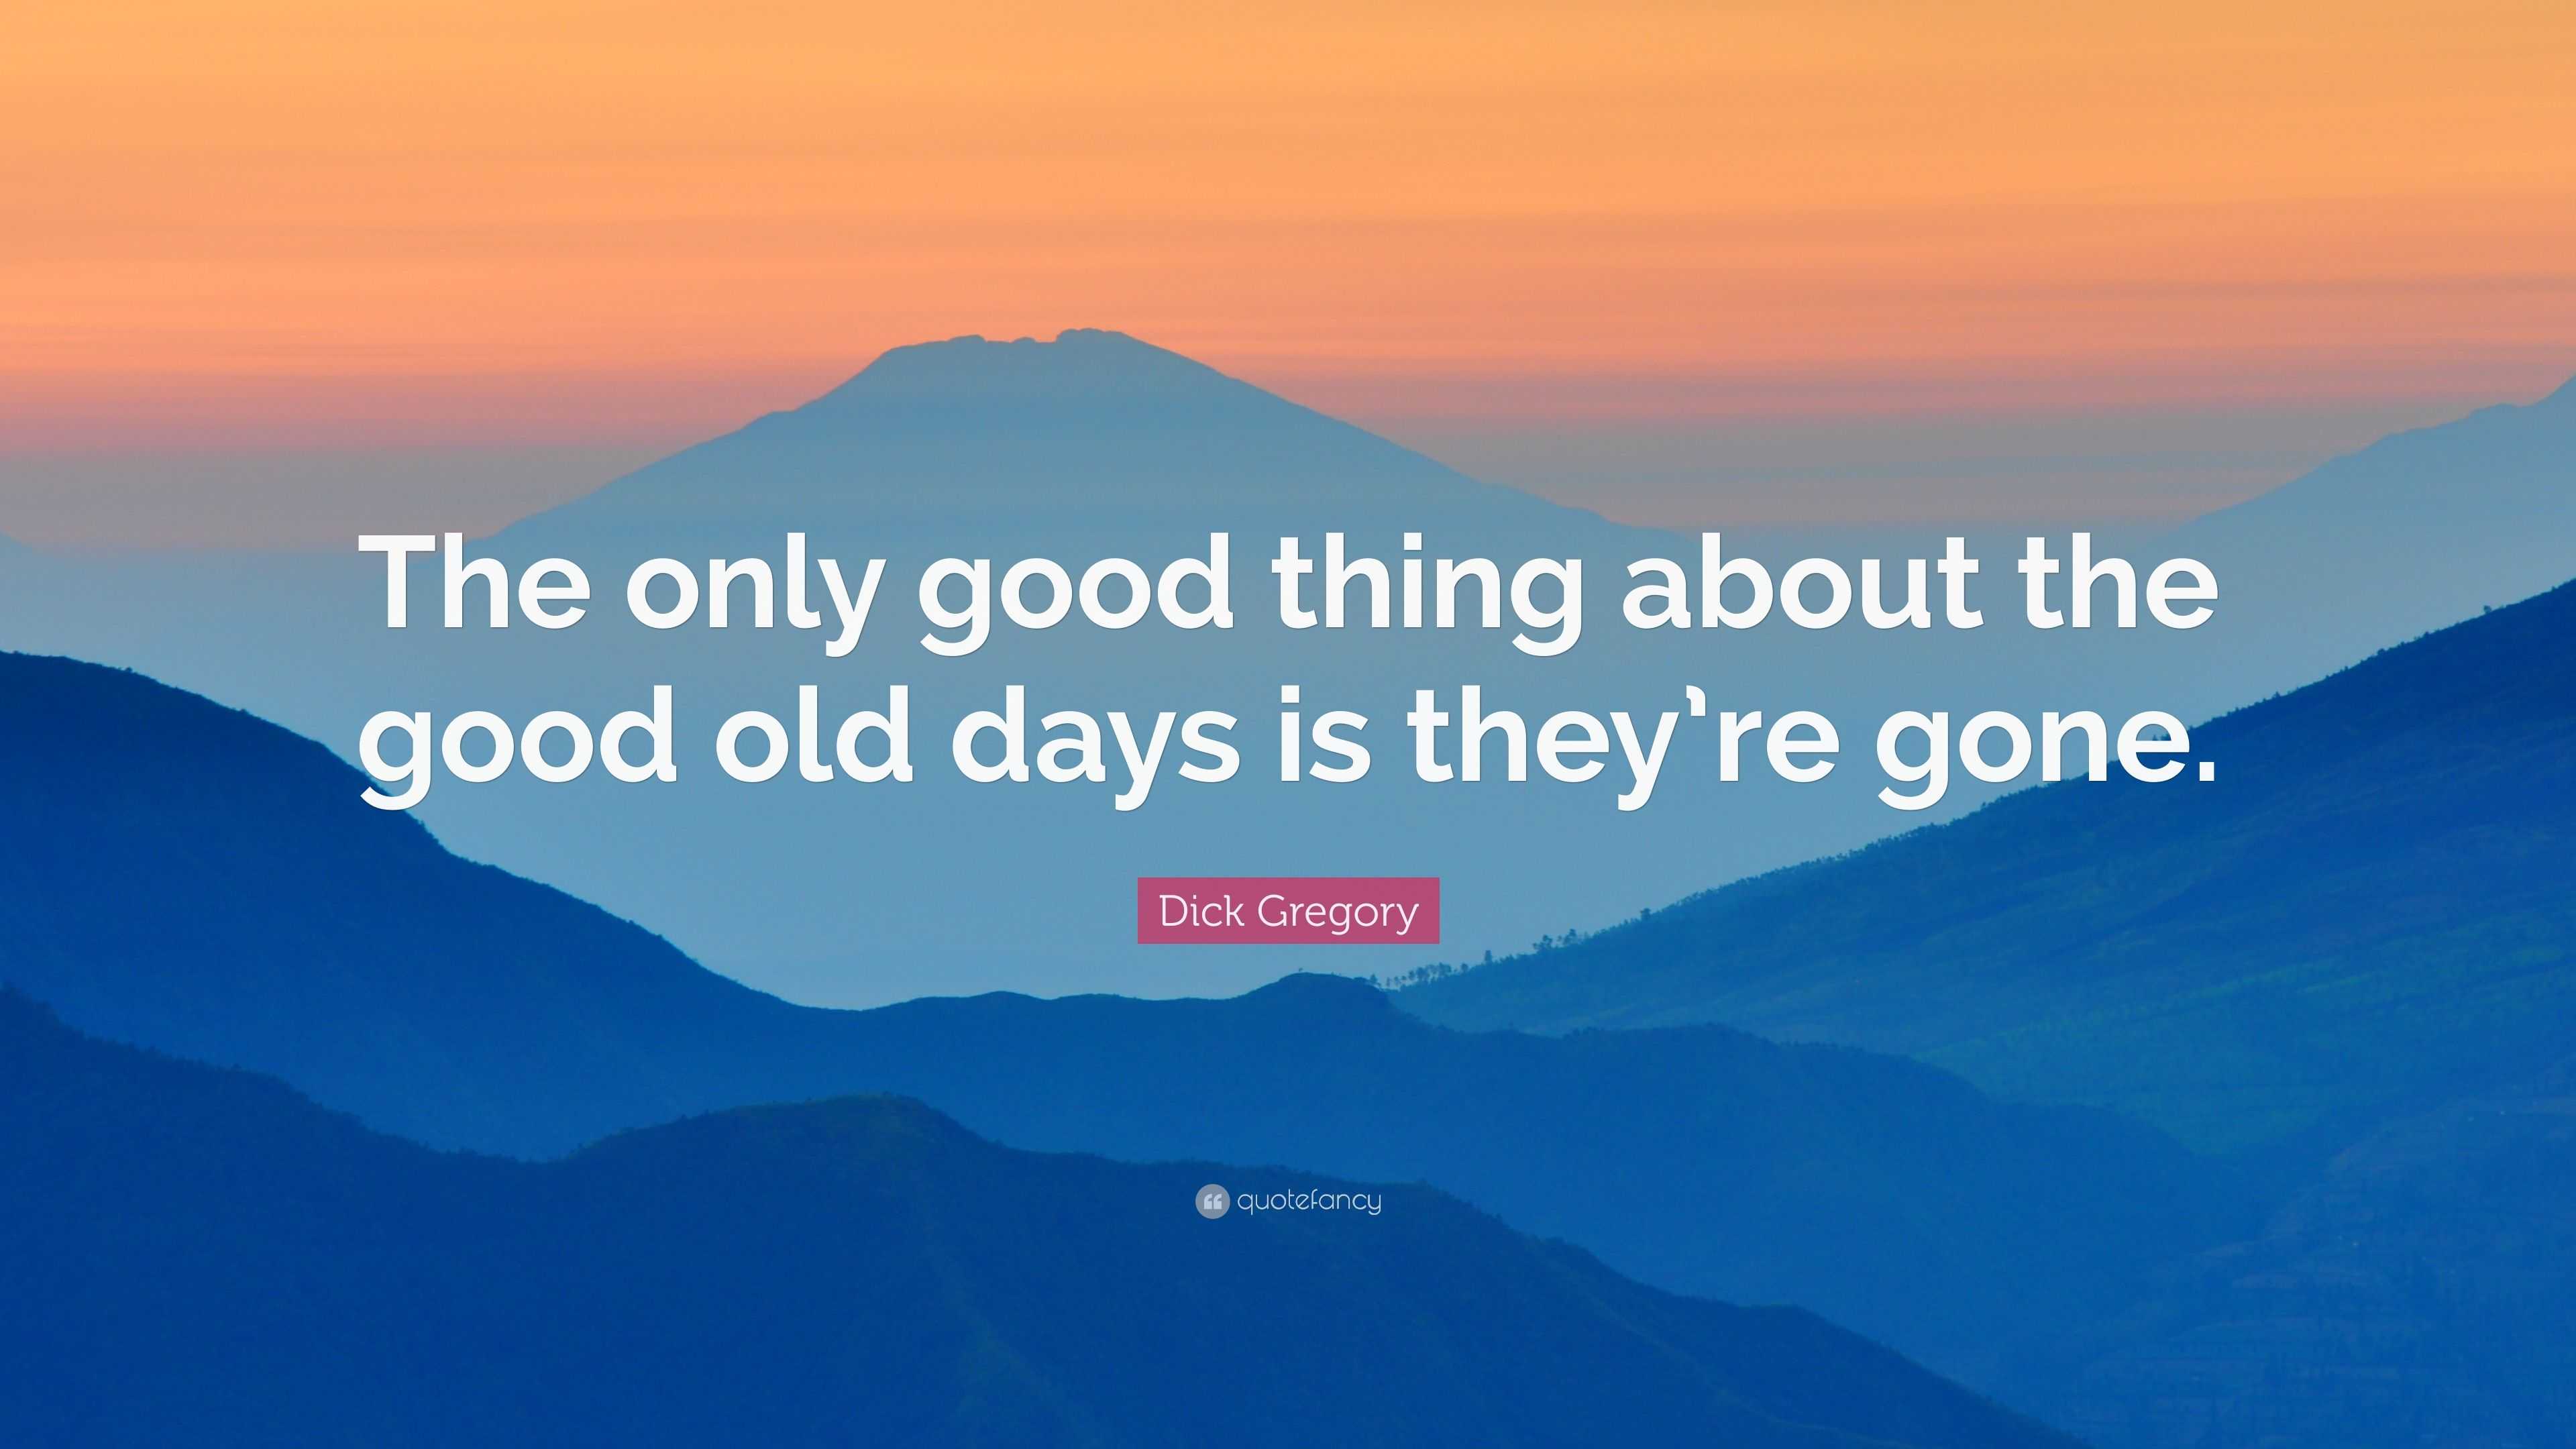 Dick Gregory Quote: “The only good thing about the good old days is ...